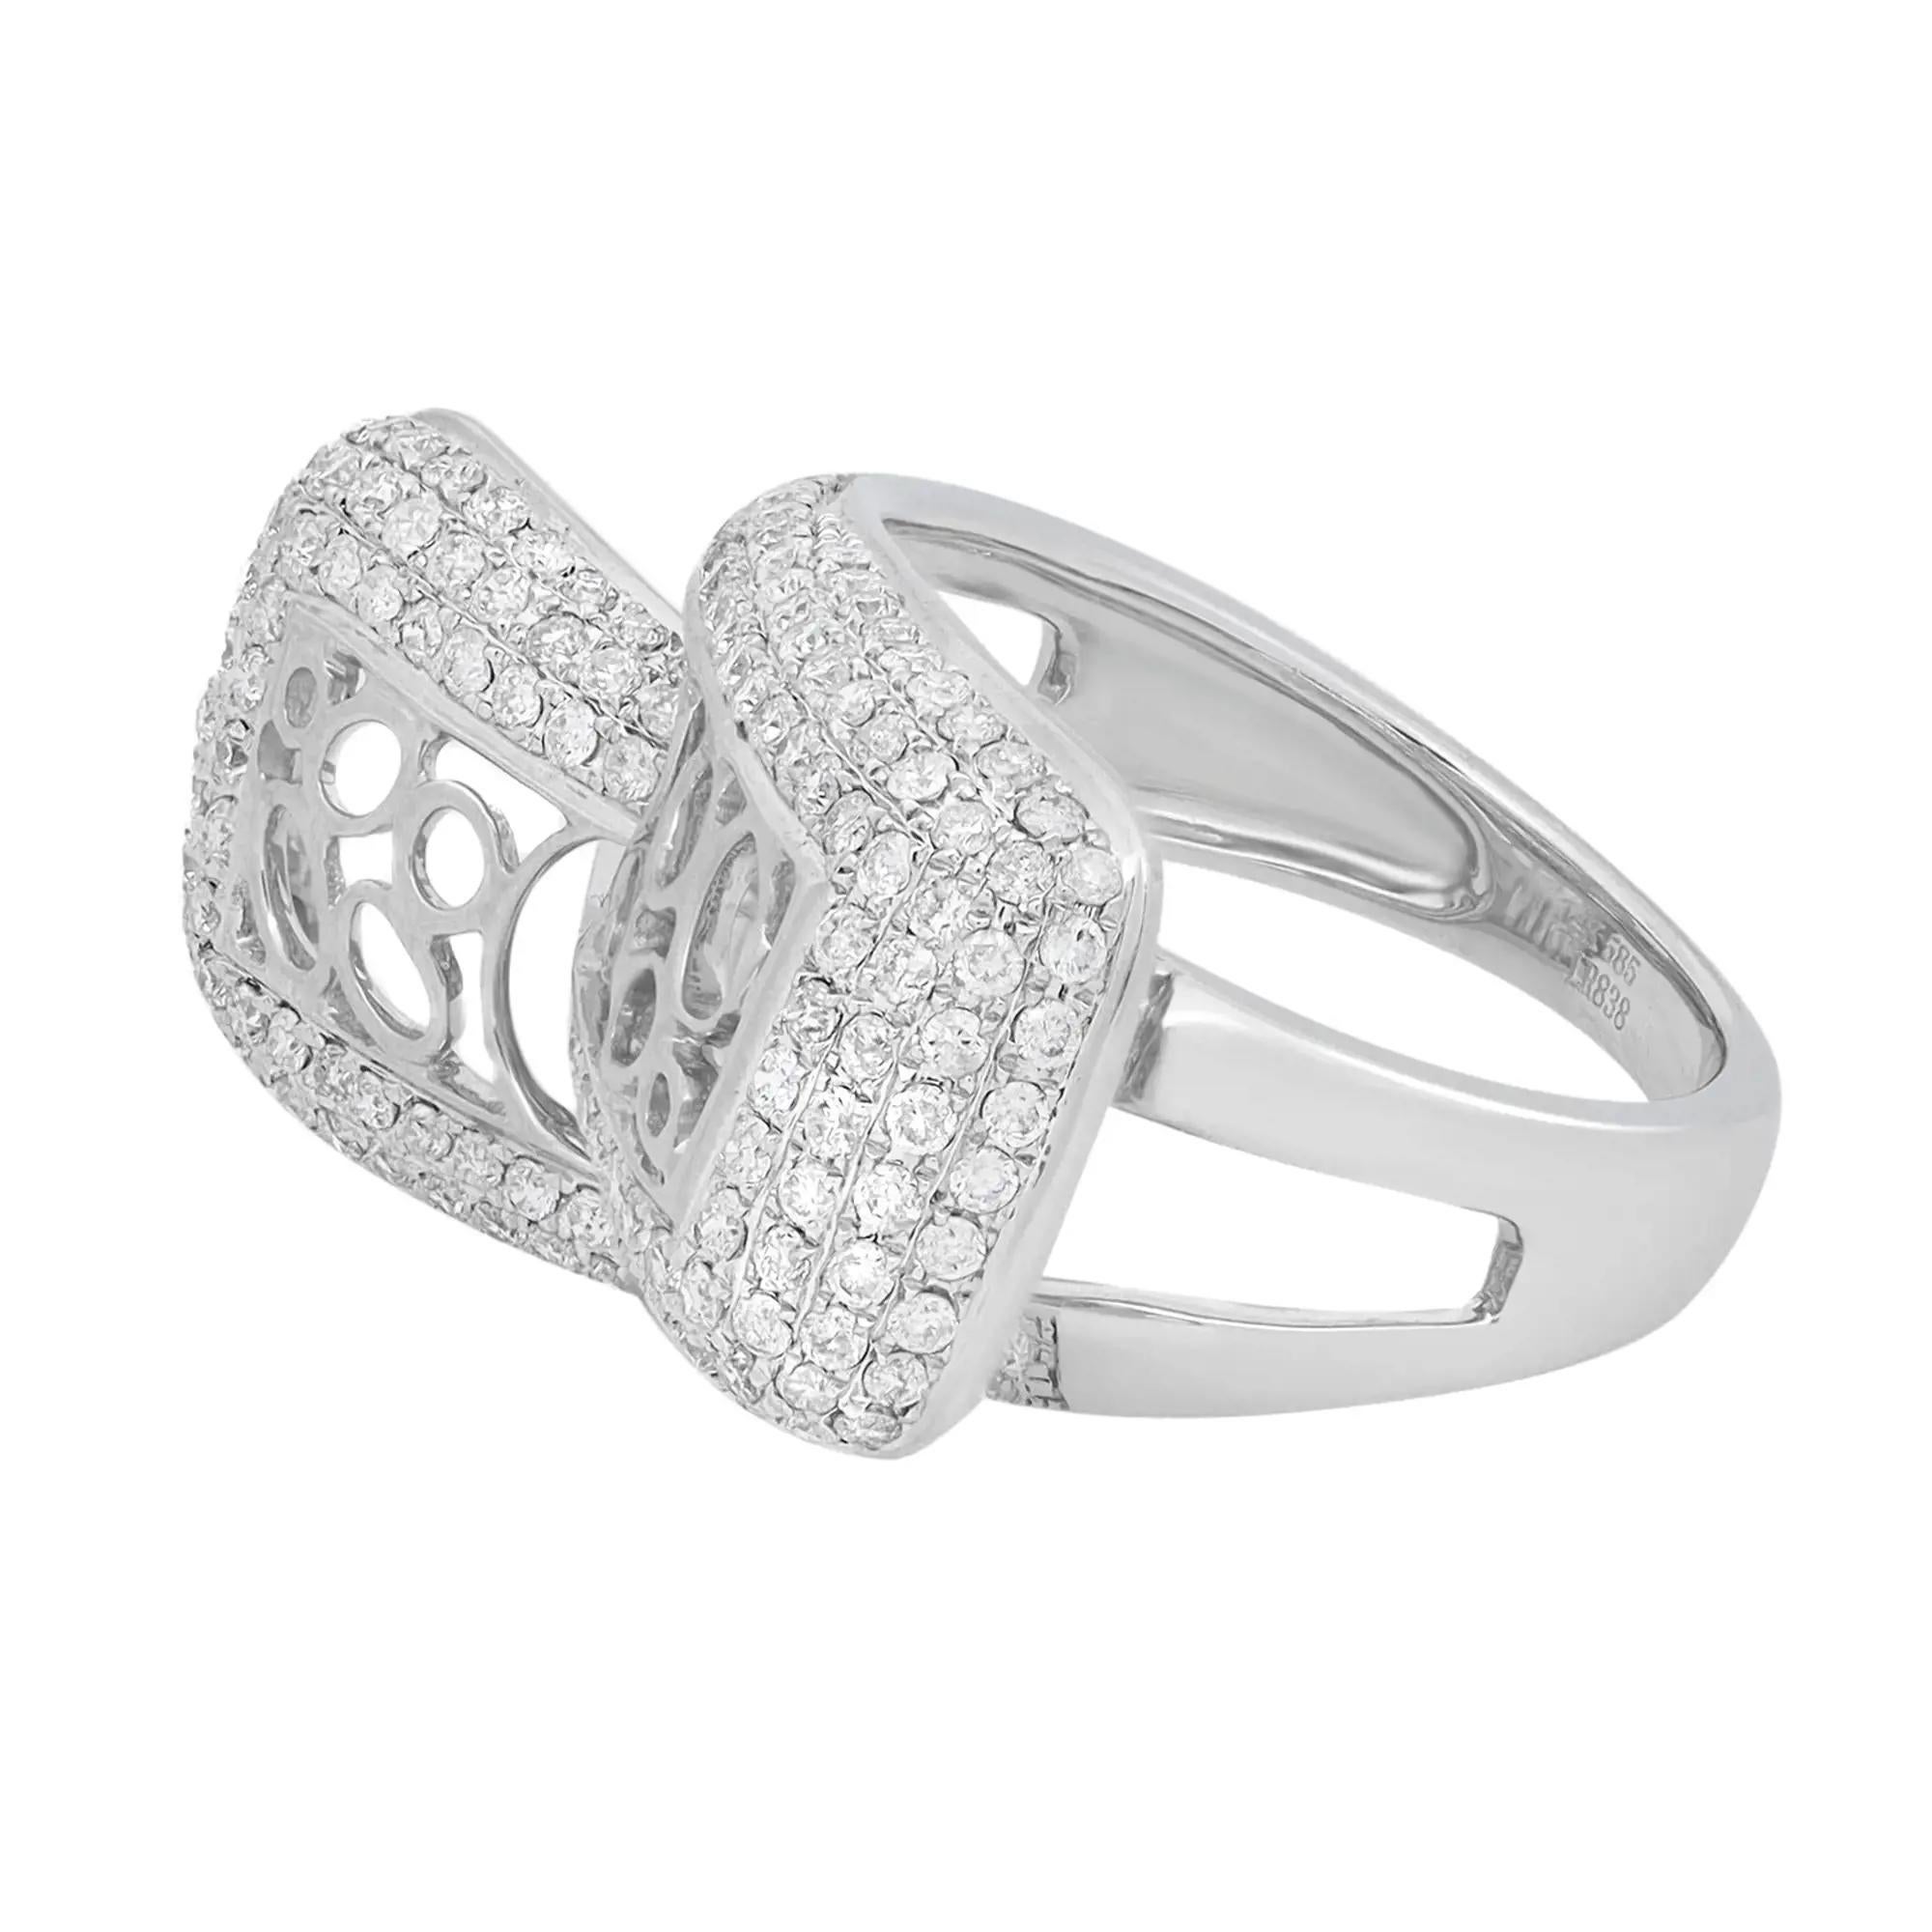 Dazzle away with this bold ladies cocktail ring. Crafted in 14k white gold. Showcasing pave set round brilliant cut diamonds weighing 1.85 carats with round intricate detailing design. Diamond quality: I color and SI1 clarity. Ring size: 7.5. Top